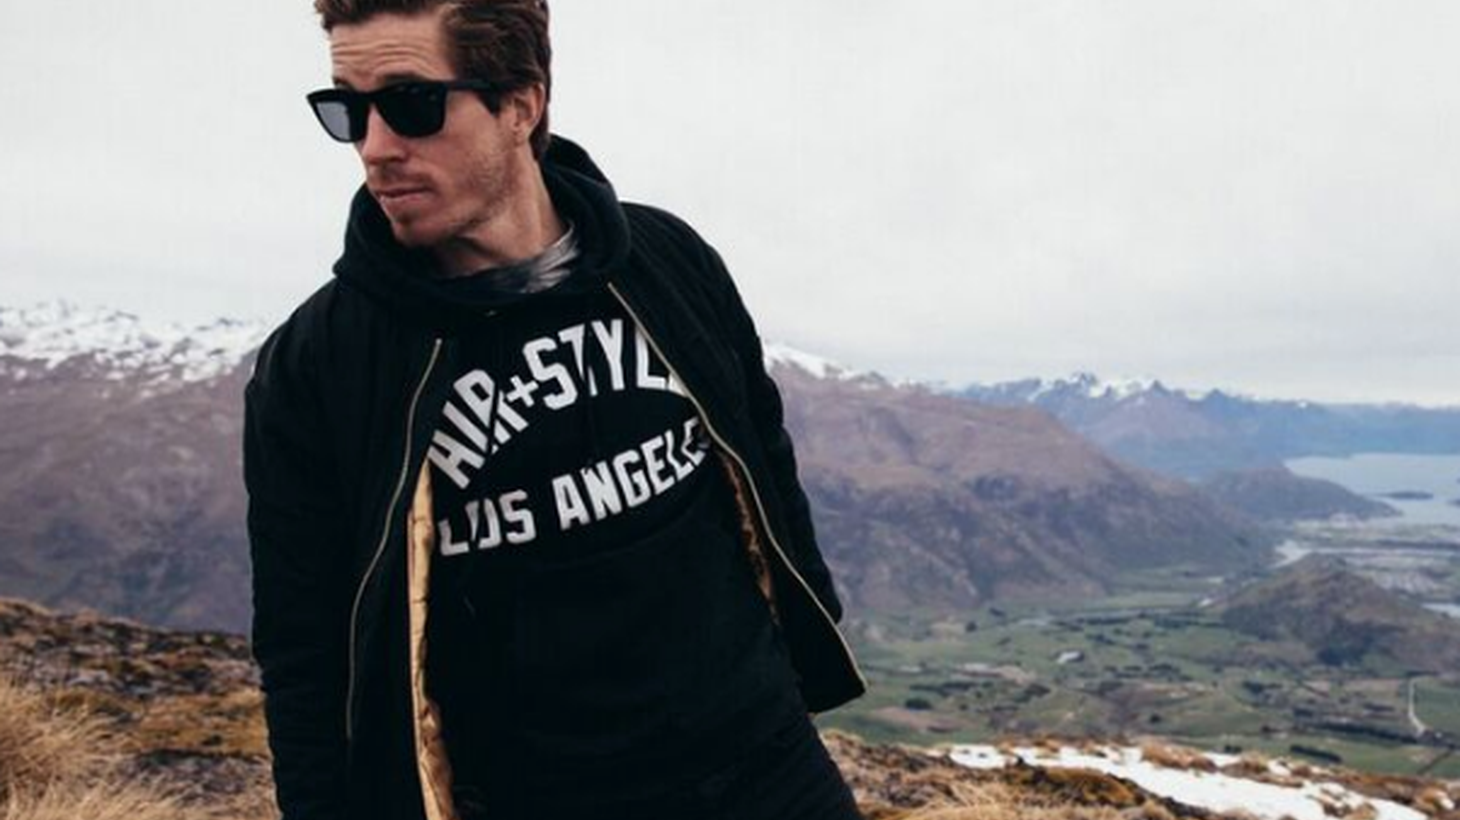 Three-time Olympic gold medalist Shaun White drops by to discuss Air & Style. Part music festival, part skateboard and snowboard competition, the music lineup includes Phoenix, Washed Out, Cut Copy and more.